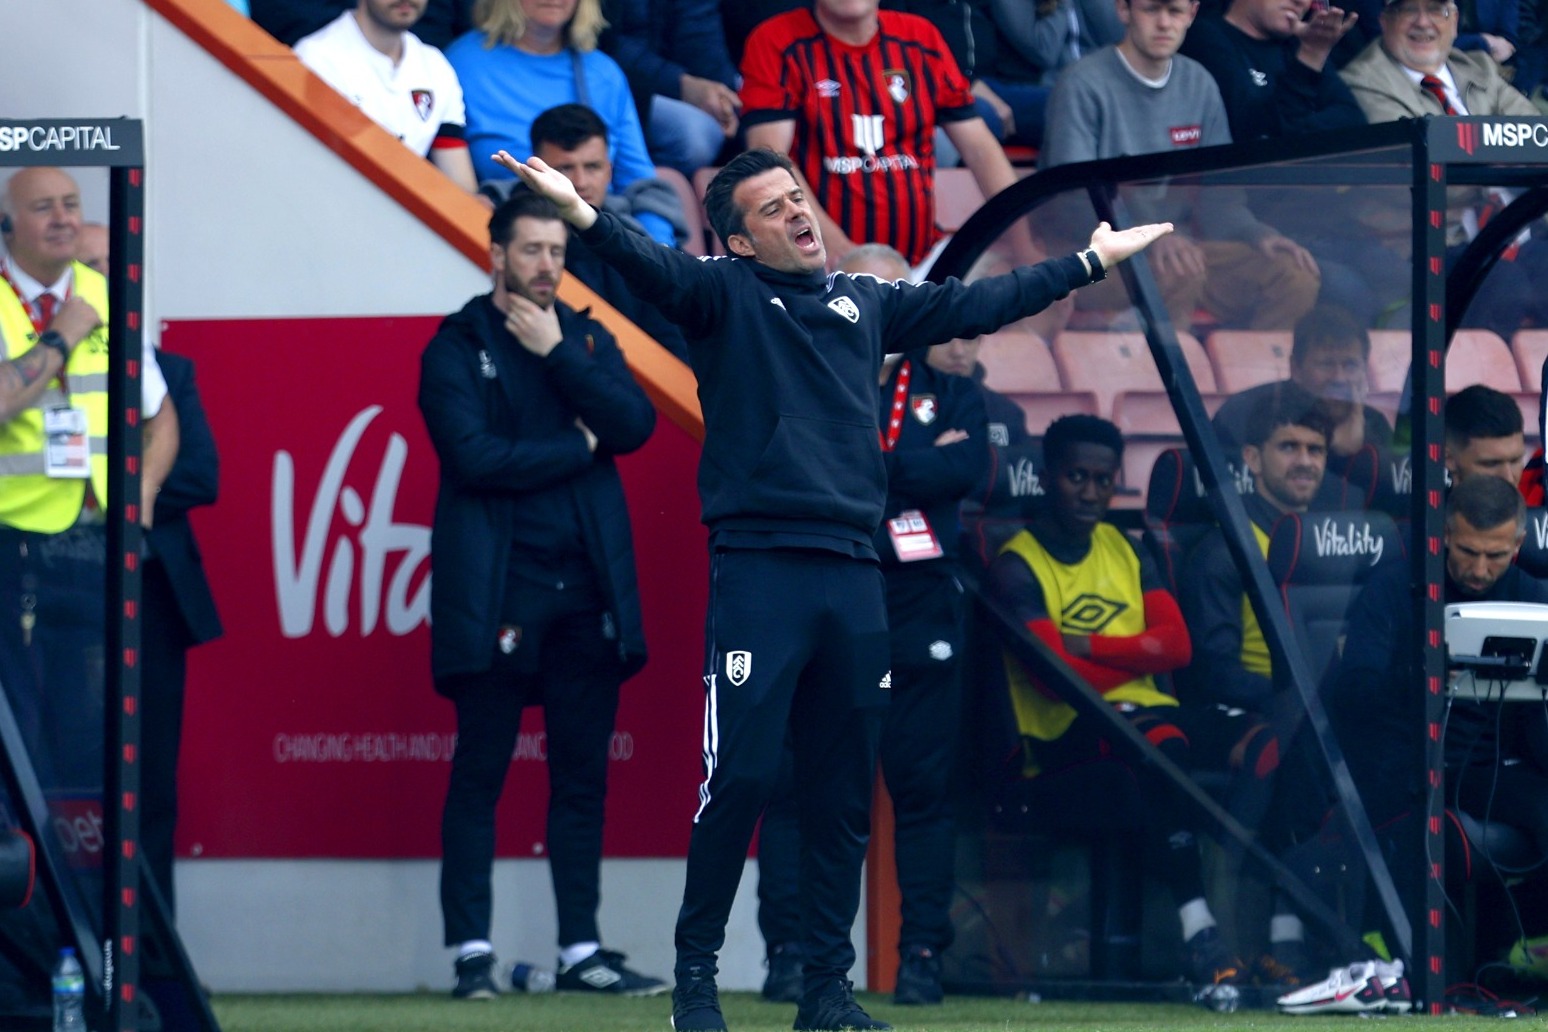 Marco Silva charged with improper conduct after dismissal in Bournemouth clash 